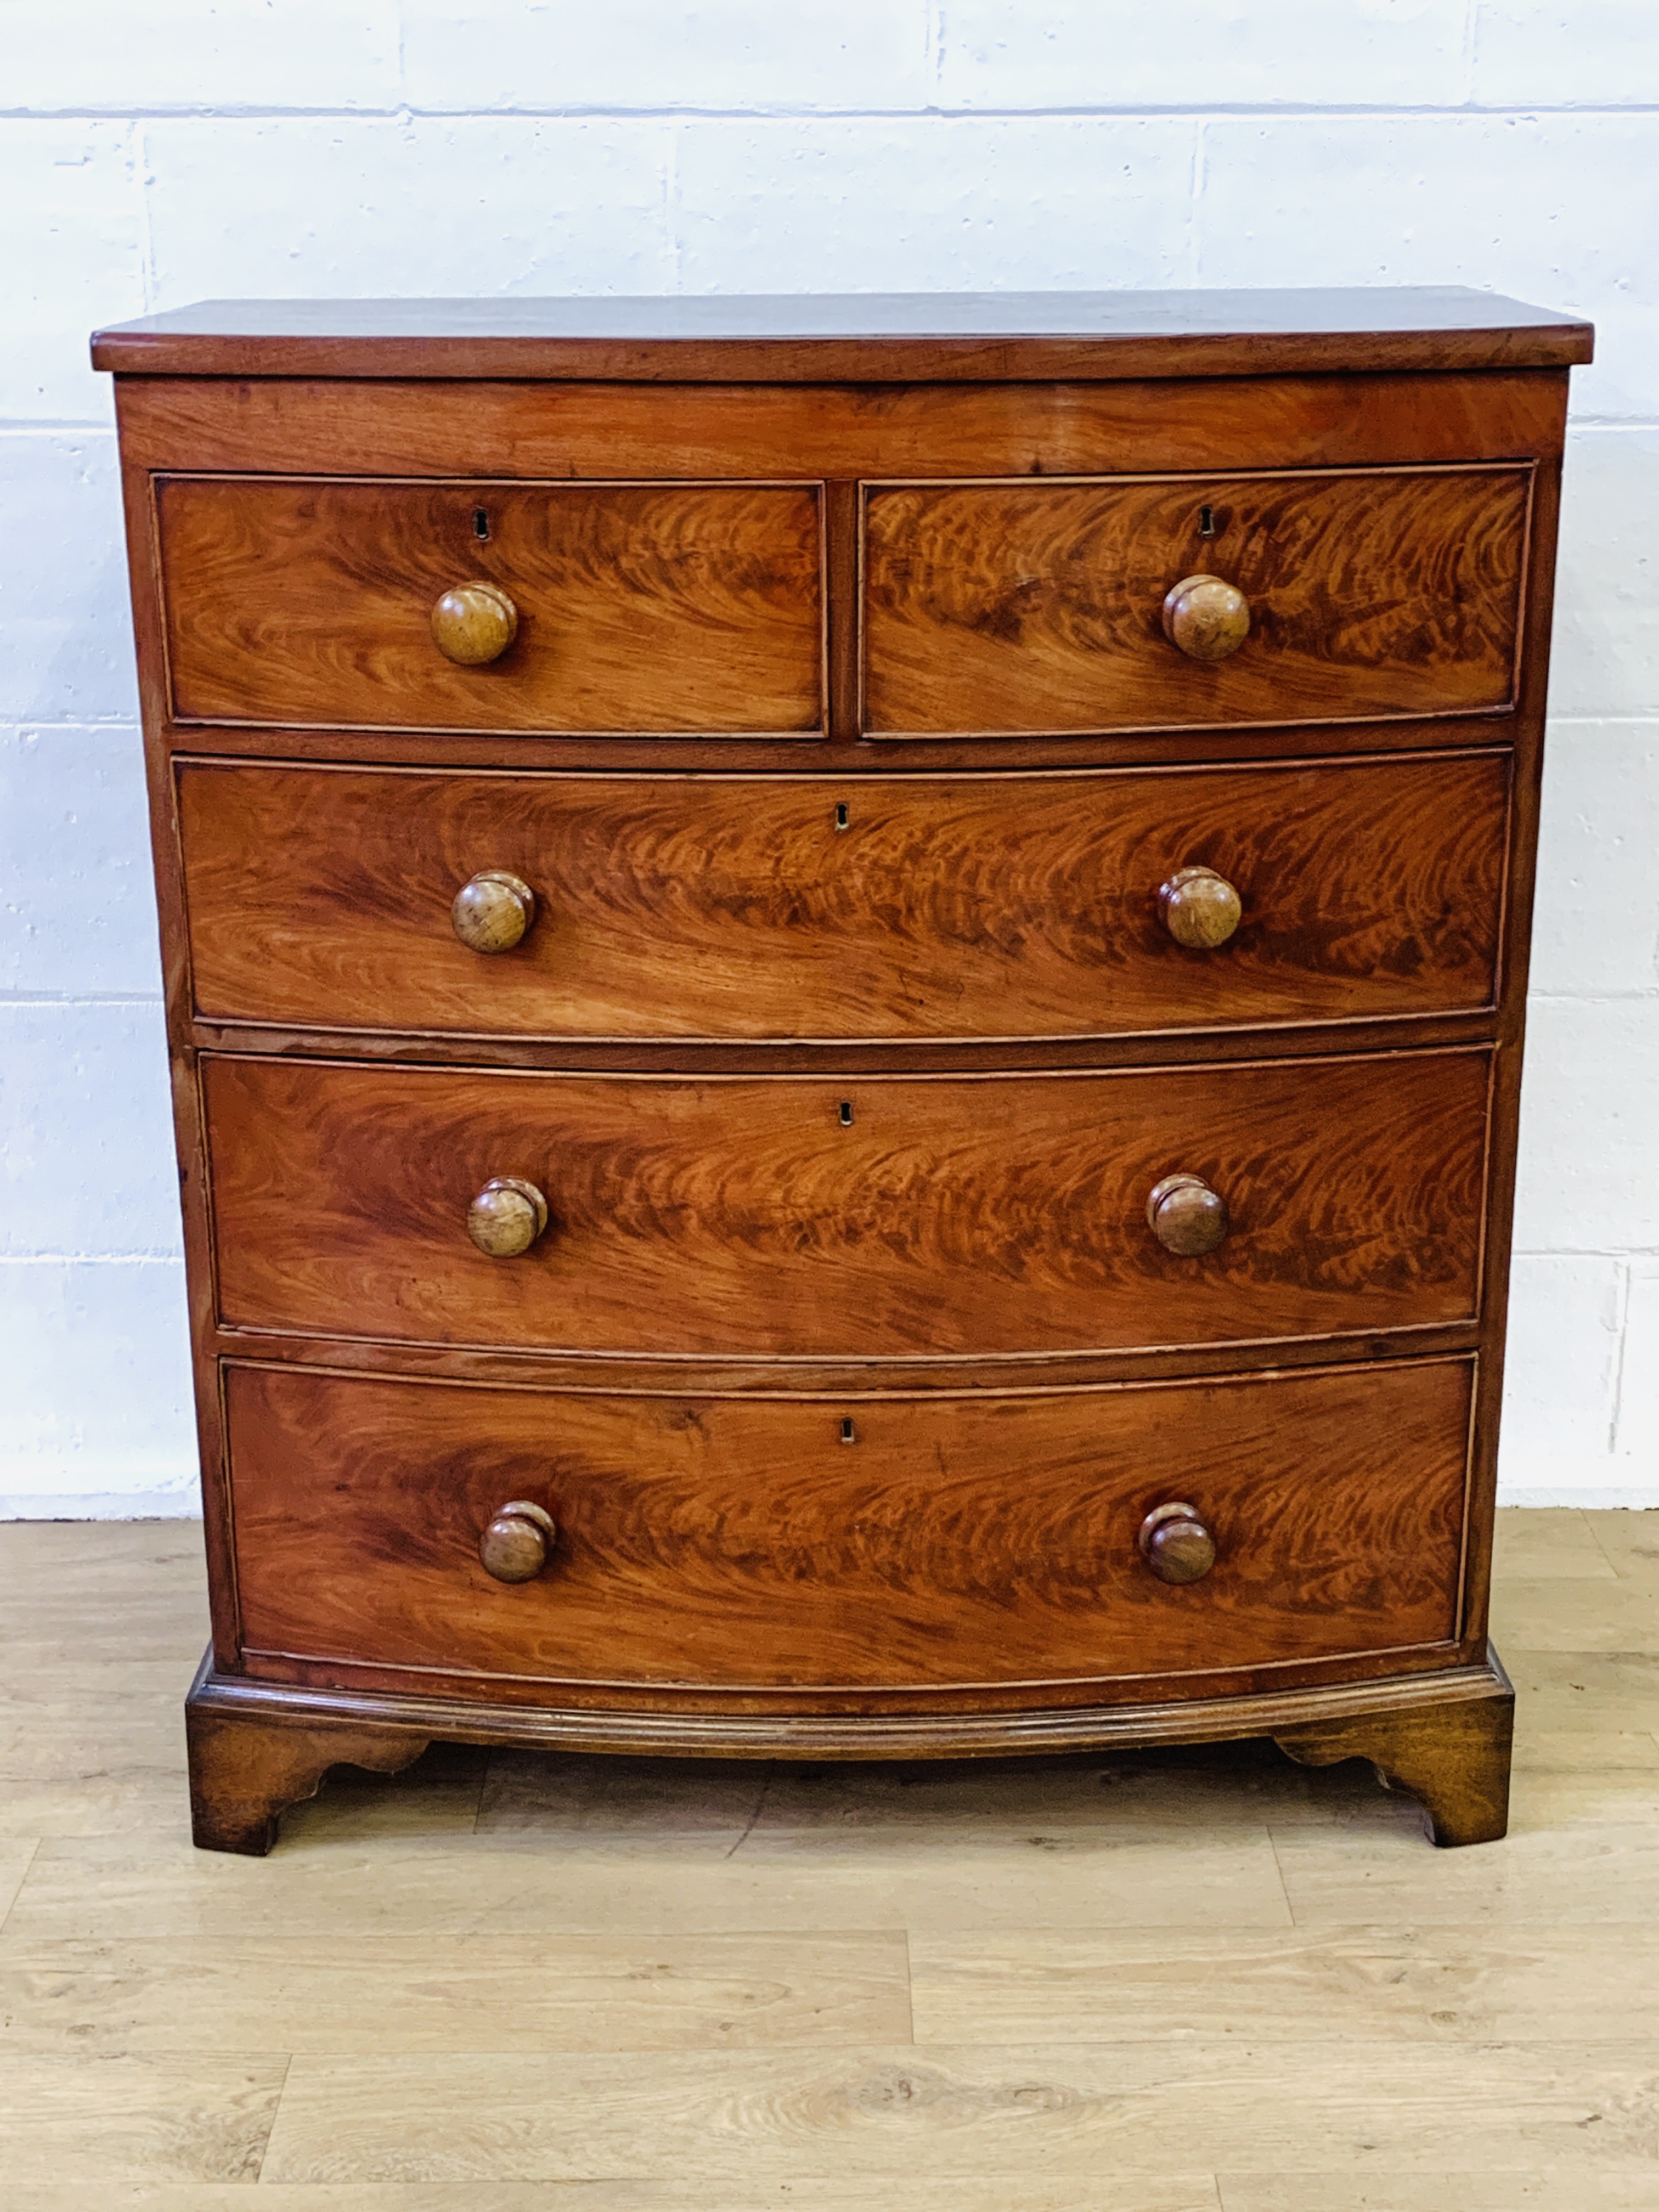 Mahogany chest of drawers - Image 7 of 7